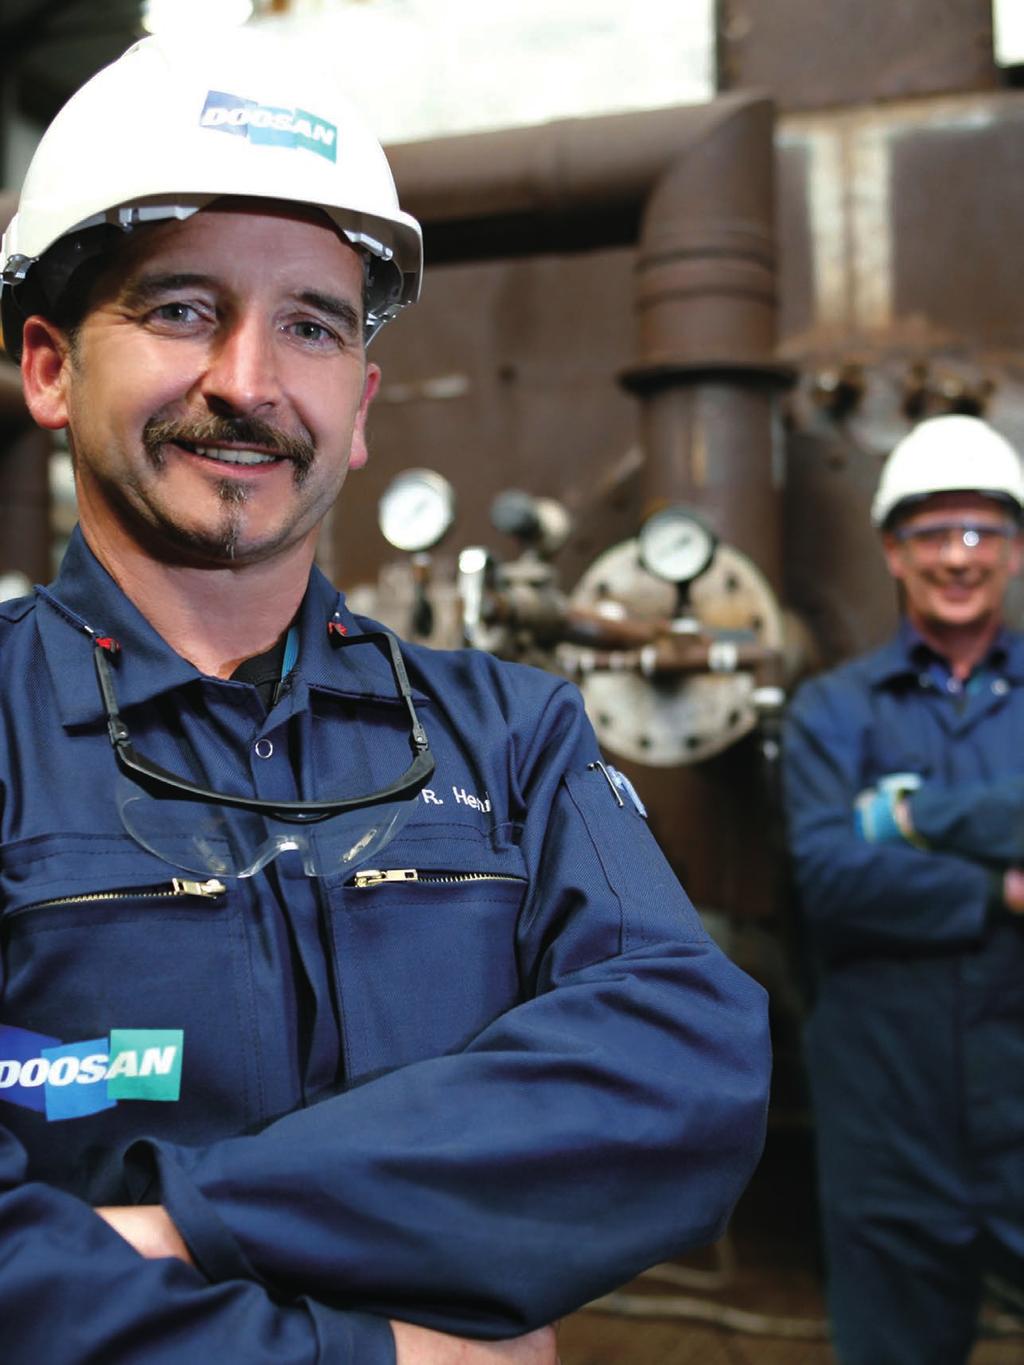 We Are Doosan. Respected Name, Strong Ties, Reliable Products. Doosan, founded in 1896, has evolved into is a multifaceted corporation employing more than 38,000 people in 33 different countries.